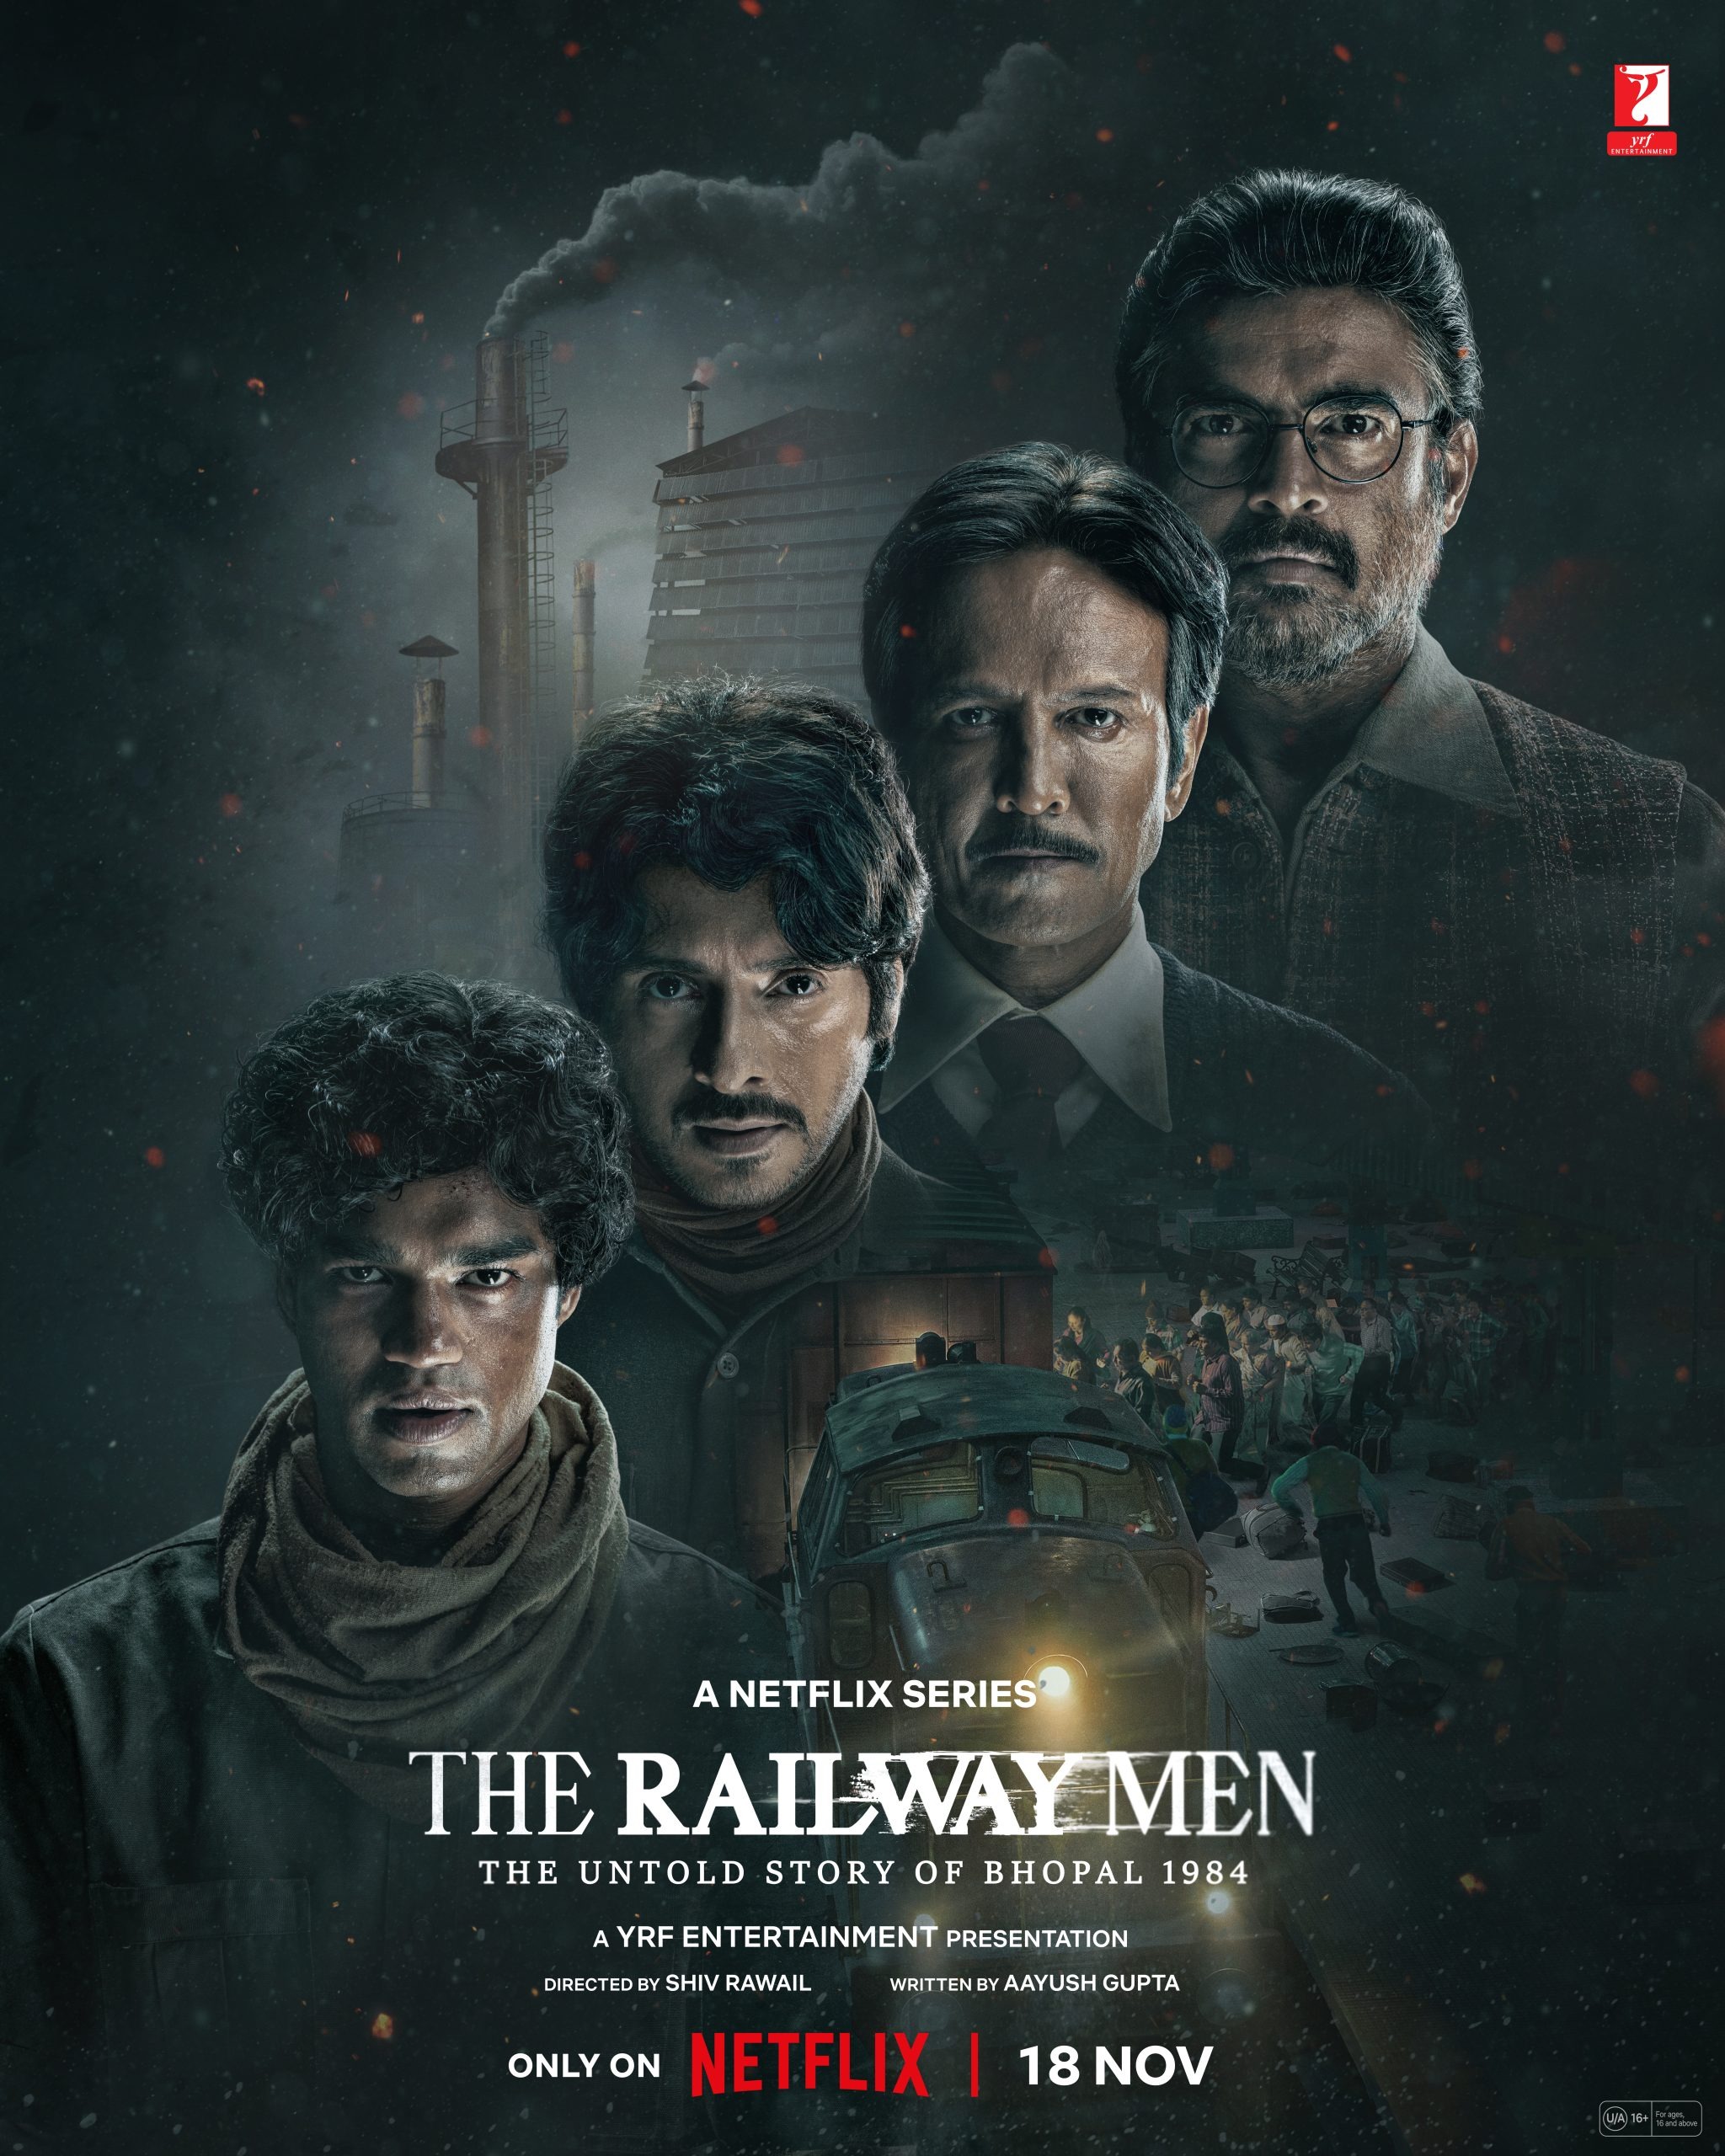 Mega Sized TV Poster Image for The Railway Men: The Untold Story of Bhopal 1984 